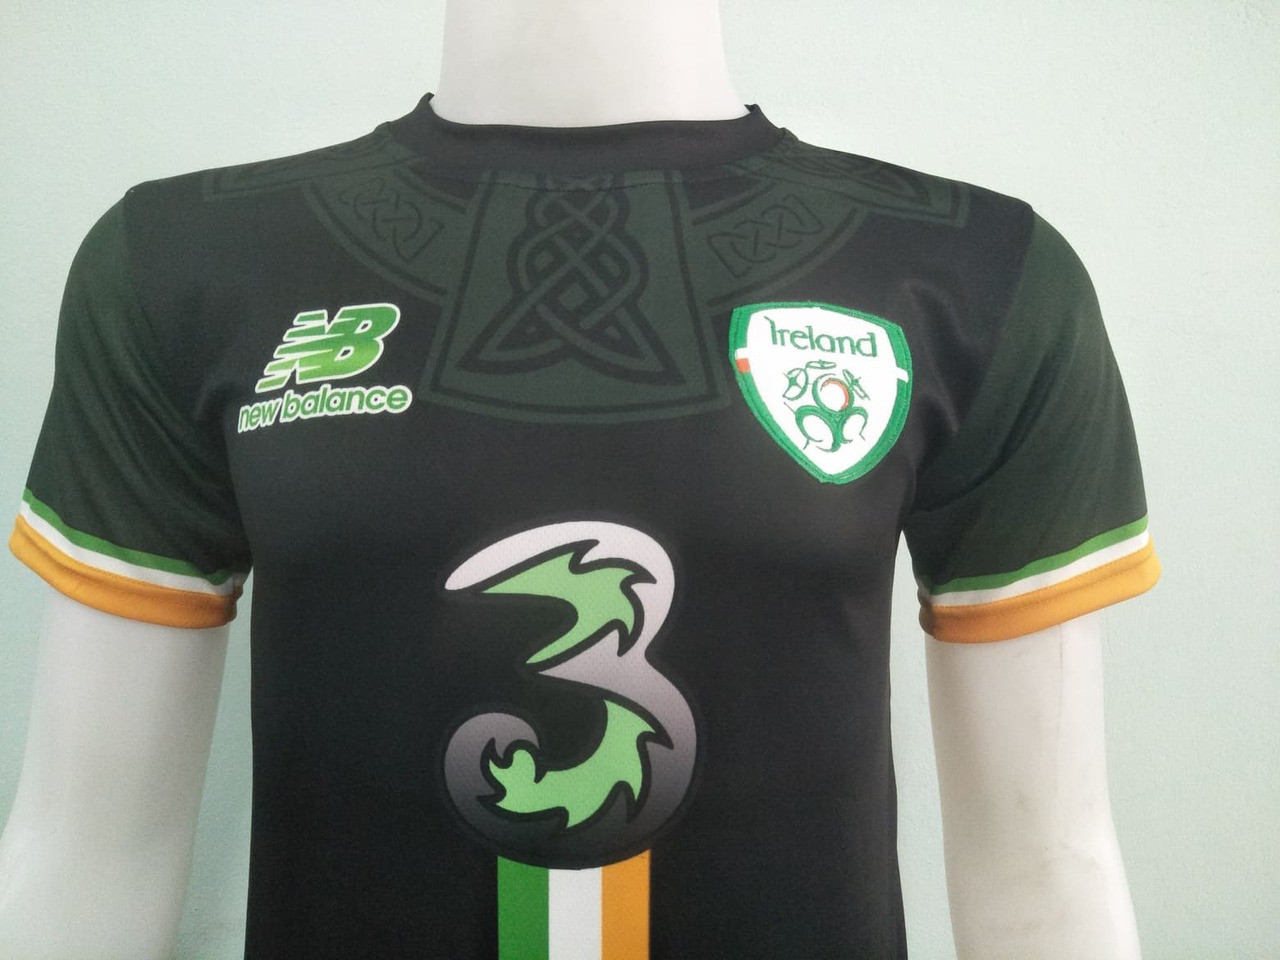 NEW IRELAND JERSEY WITH EMBROIDERY BADGES #45 - irish and celtic clothing